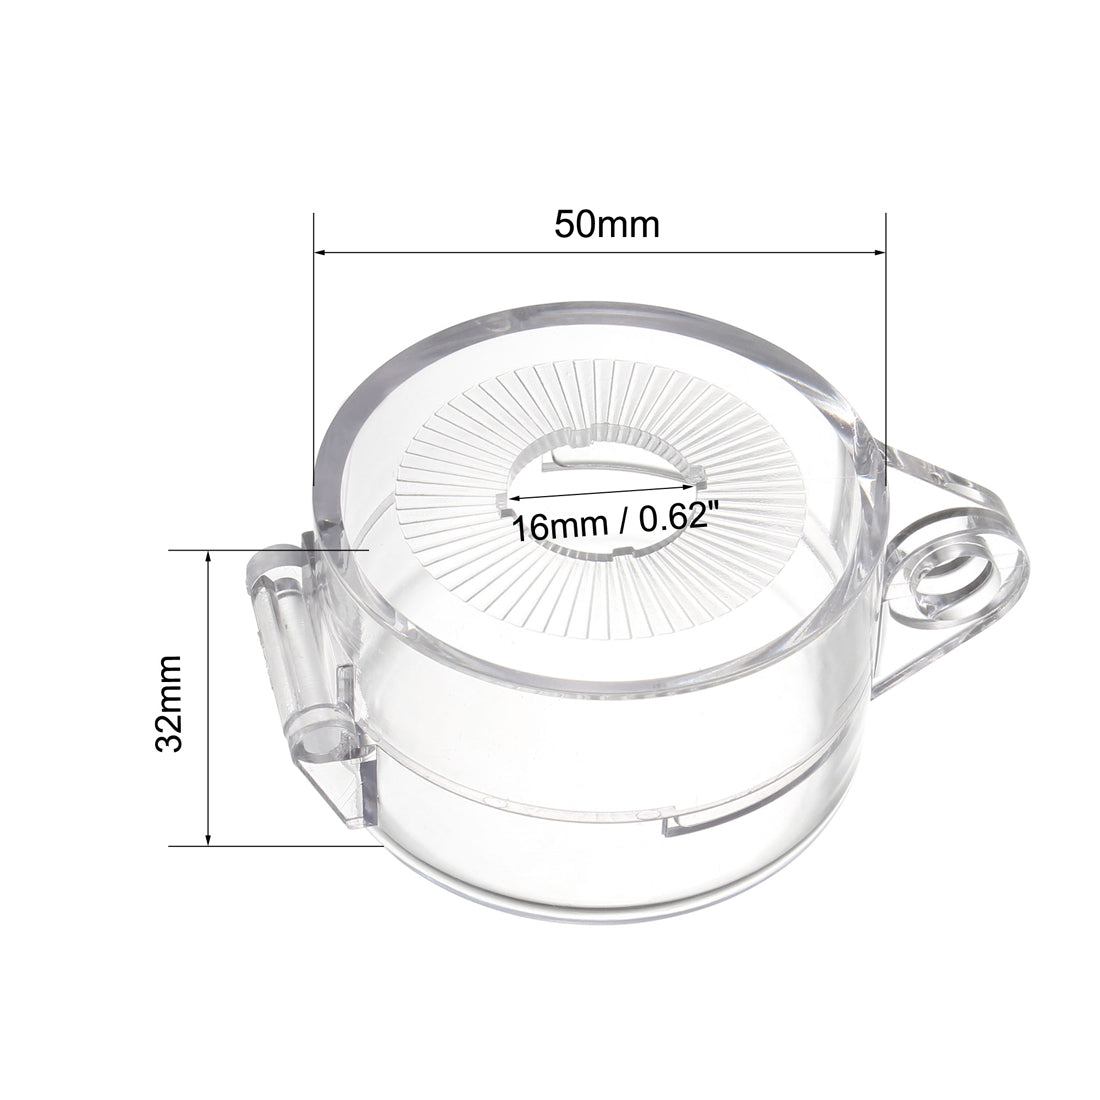 Uxcell Uxcell 1pcs Clear Plastic Switch Cover Protector for 16mm Diameter Push Button Switch 50*32